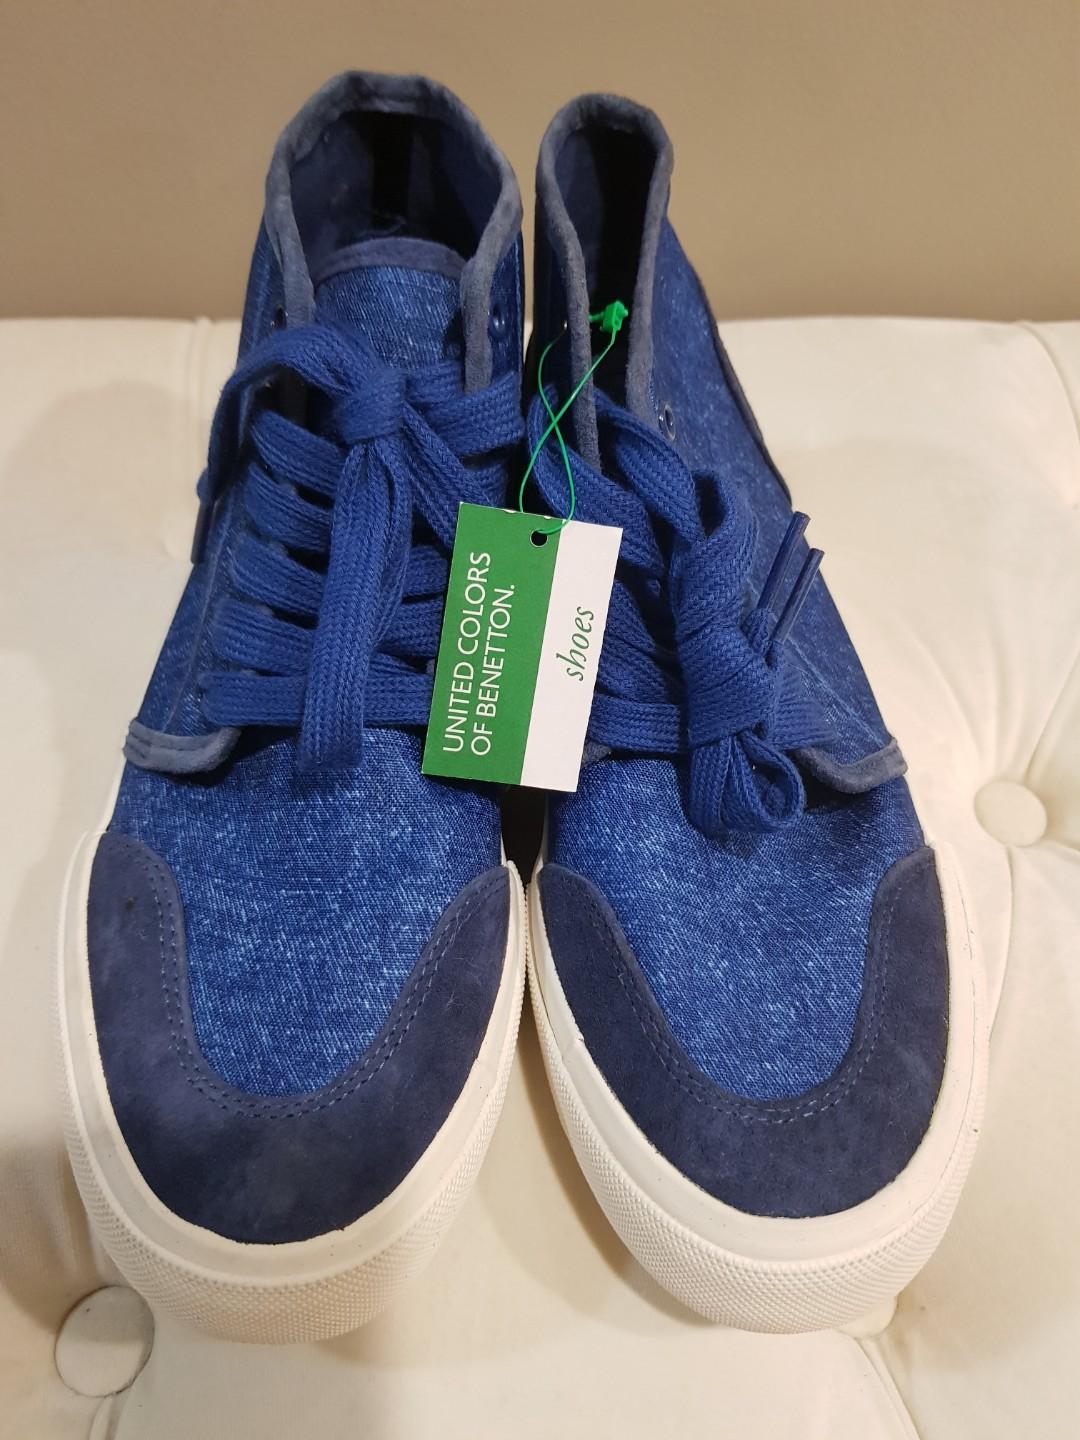 united colors of benetton blue sneakers